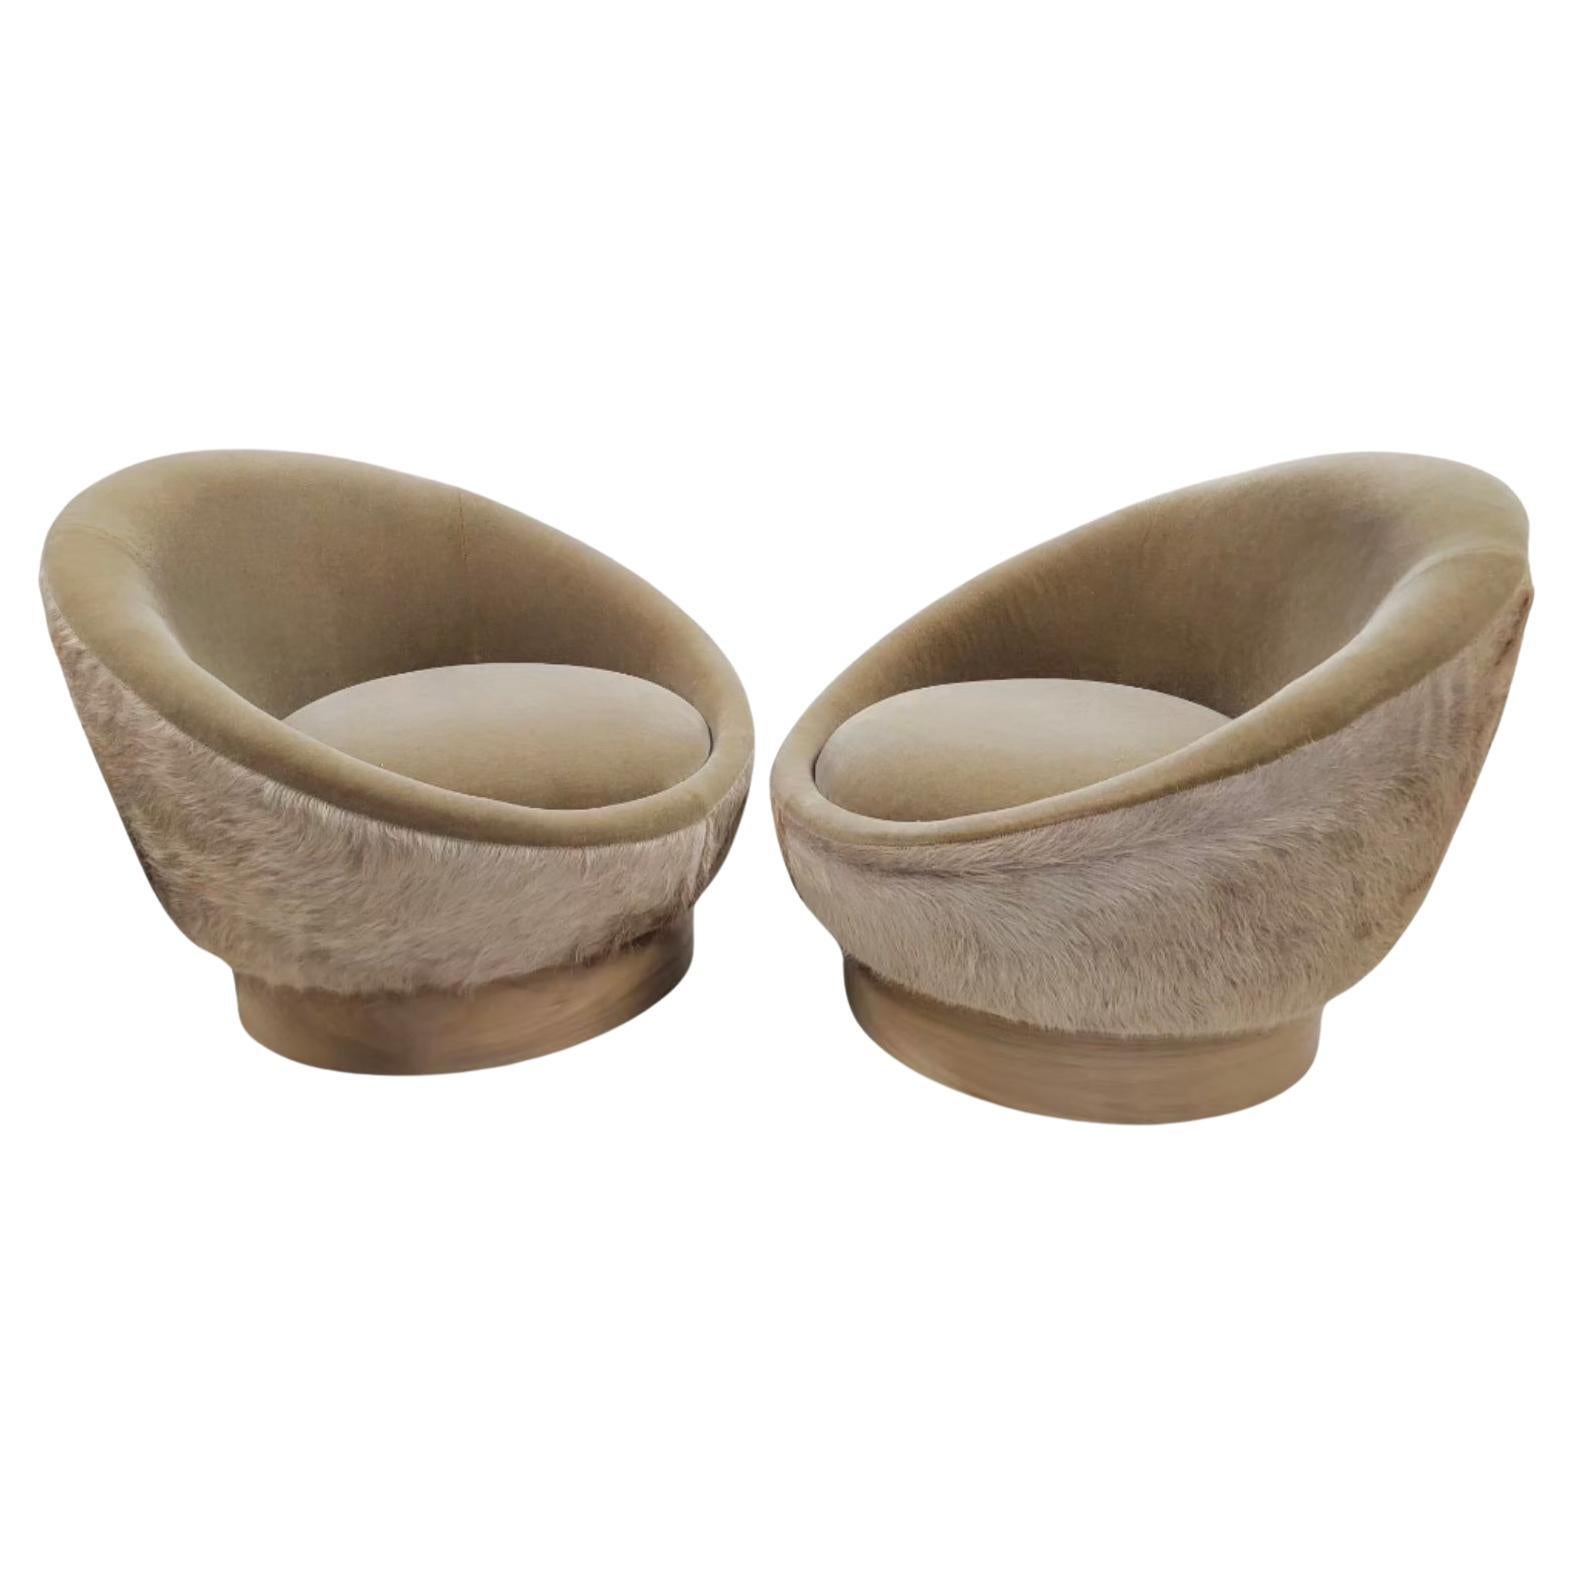 Vintage Modern Swivel Pod Lounges Newly Custom Upholstered in Plush Camel Mohair with Brazilian Hair-on Cowhide - Pair 

The Vintage Modern Set of Swivel Pod Lounges Newly Custom Upholstered in Plush Camel Mohair with Brazilian Hair-on Cowhide is a